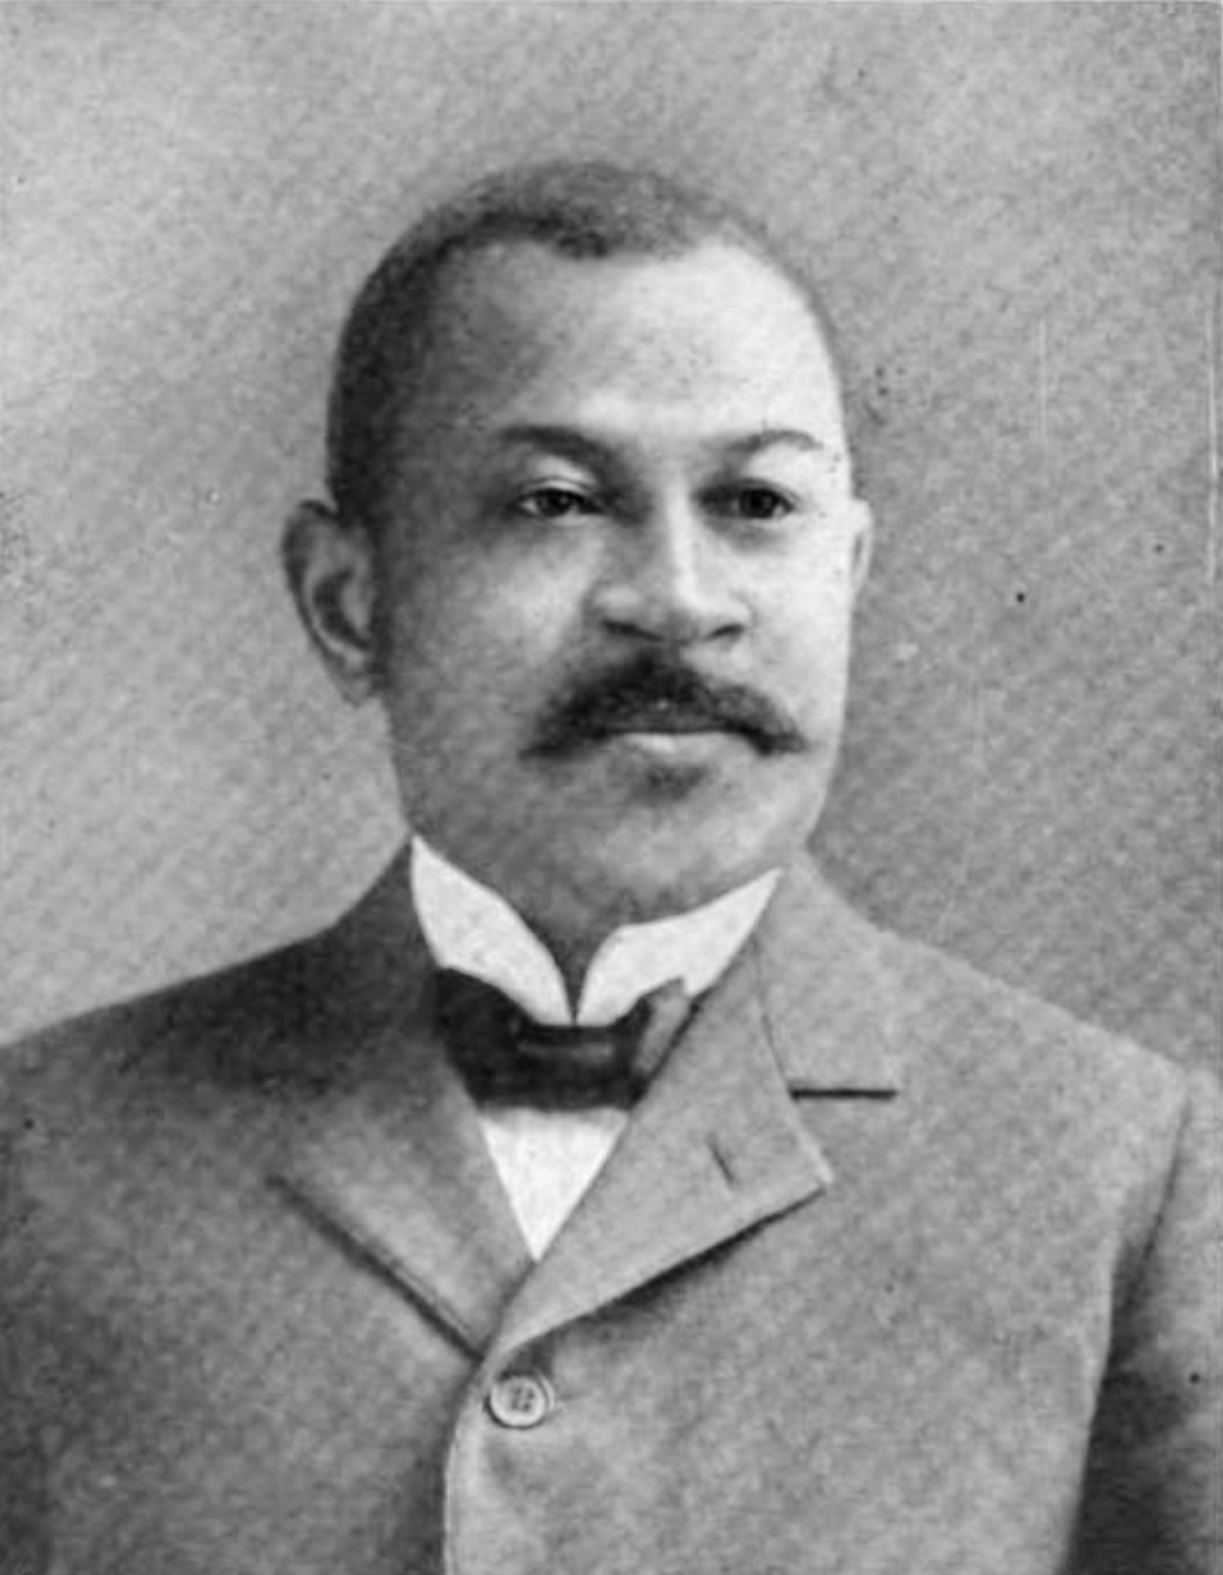 Black and white photo of Henry Baker, an African American man, wearing a suit and bowtie